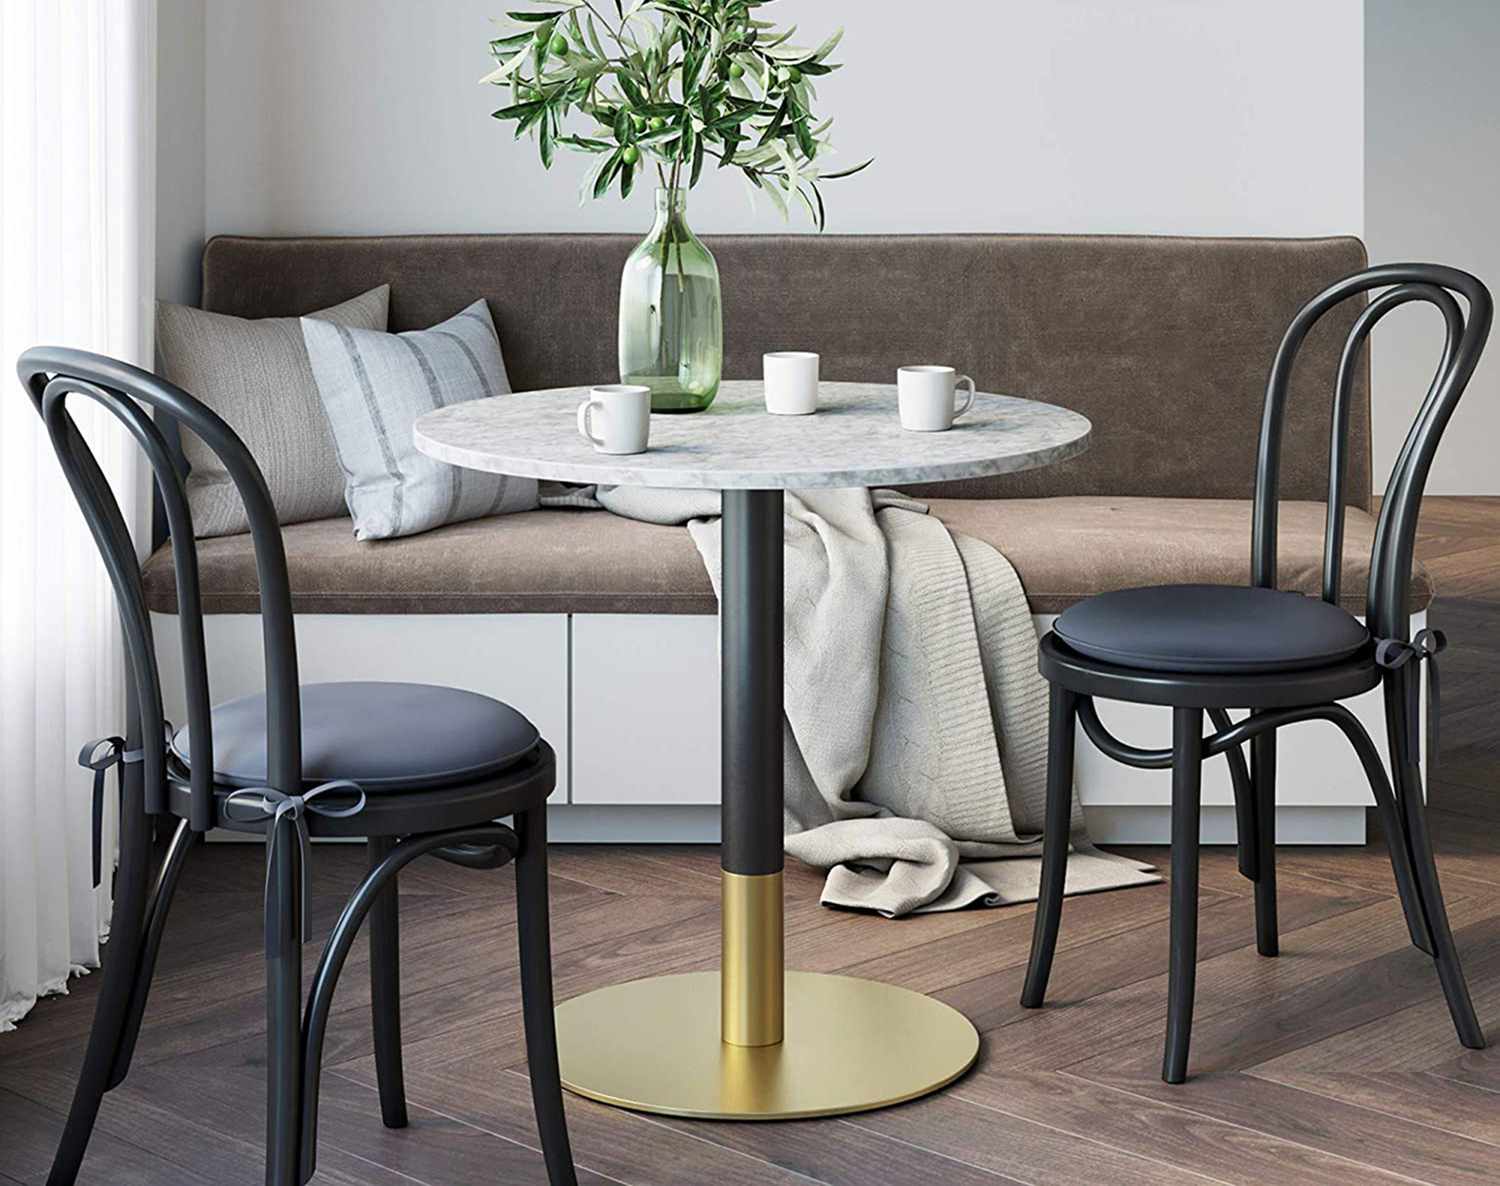 8 Best Dining Tables For Small Spaces, Round Dining Table Sets For Small Spaces